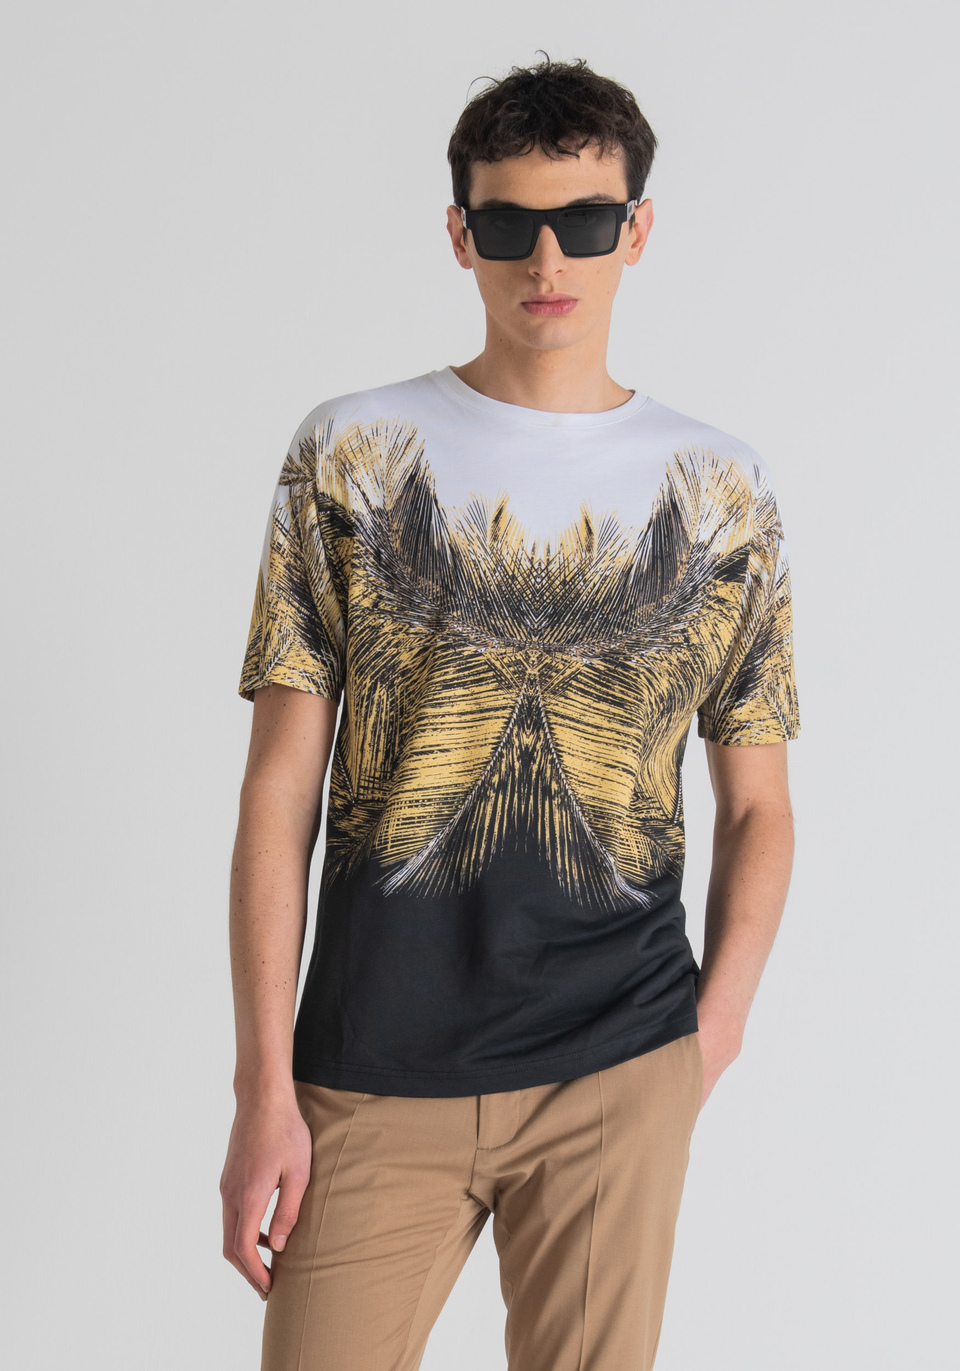 SLIM-FIT T-SHIRT IN PURE COTTON WITH A PATTERN PRINT - Antony Morato Online Shop